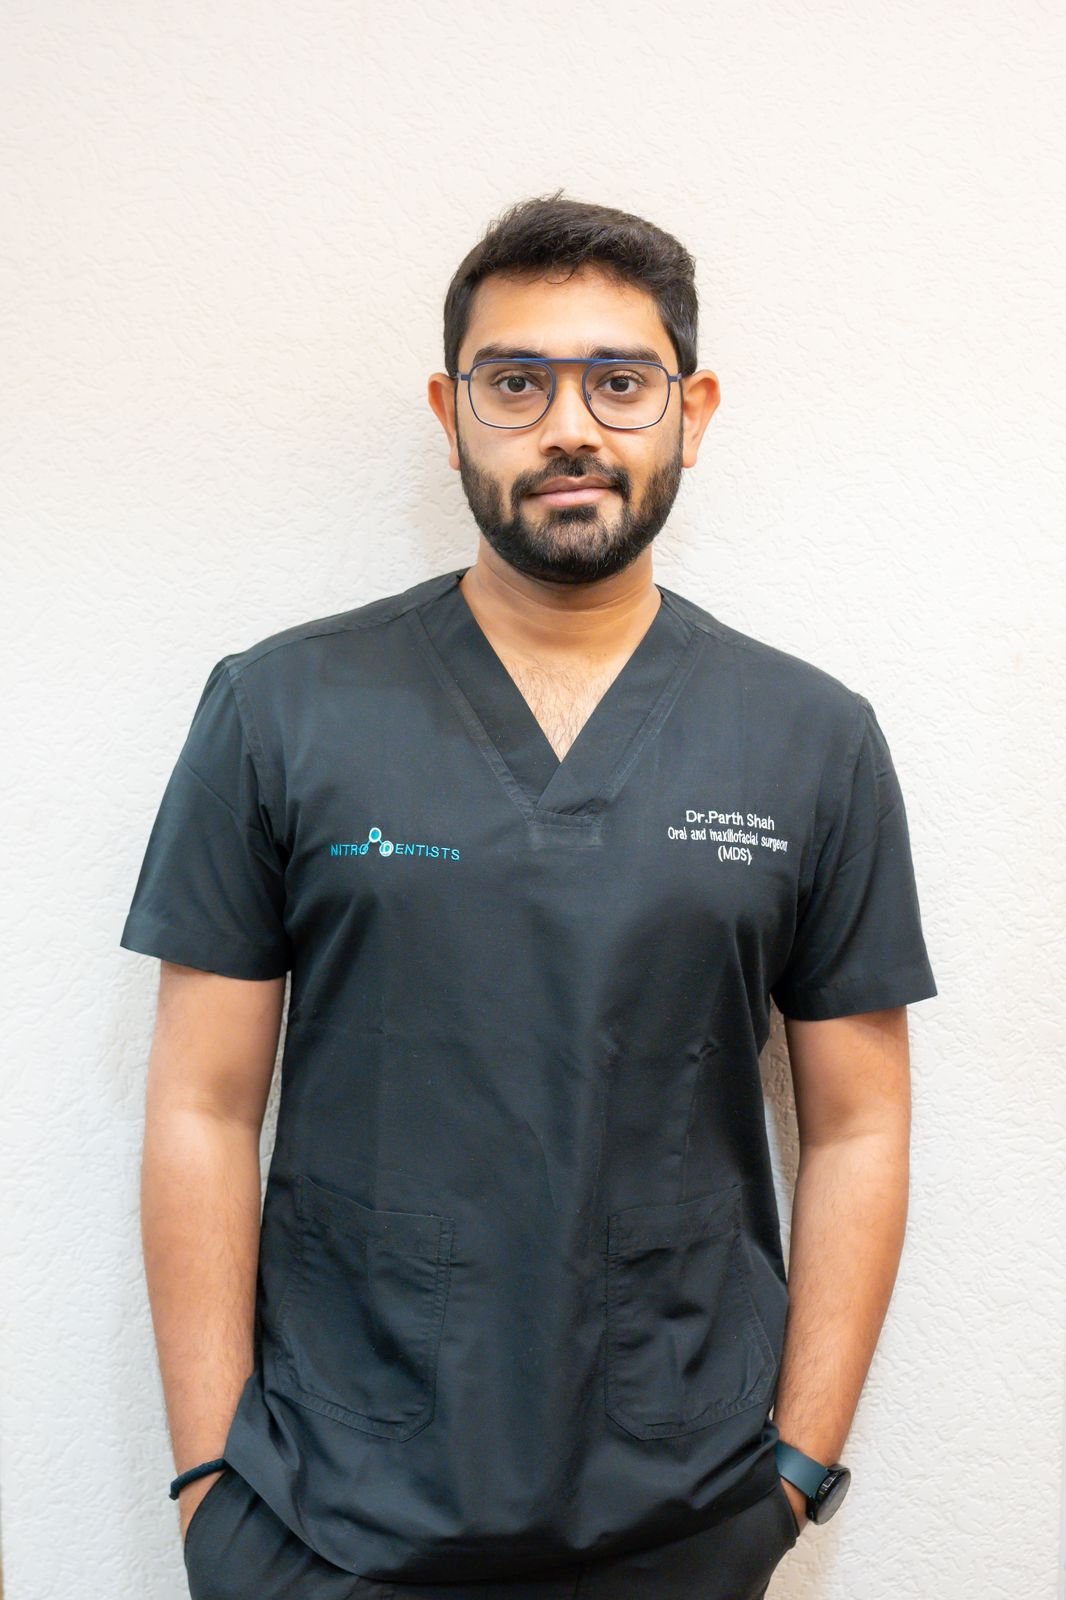 Dr. Parth Shah, Dentist in Mumbai - Expert Care and Compassionate Treatment